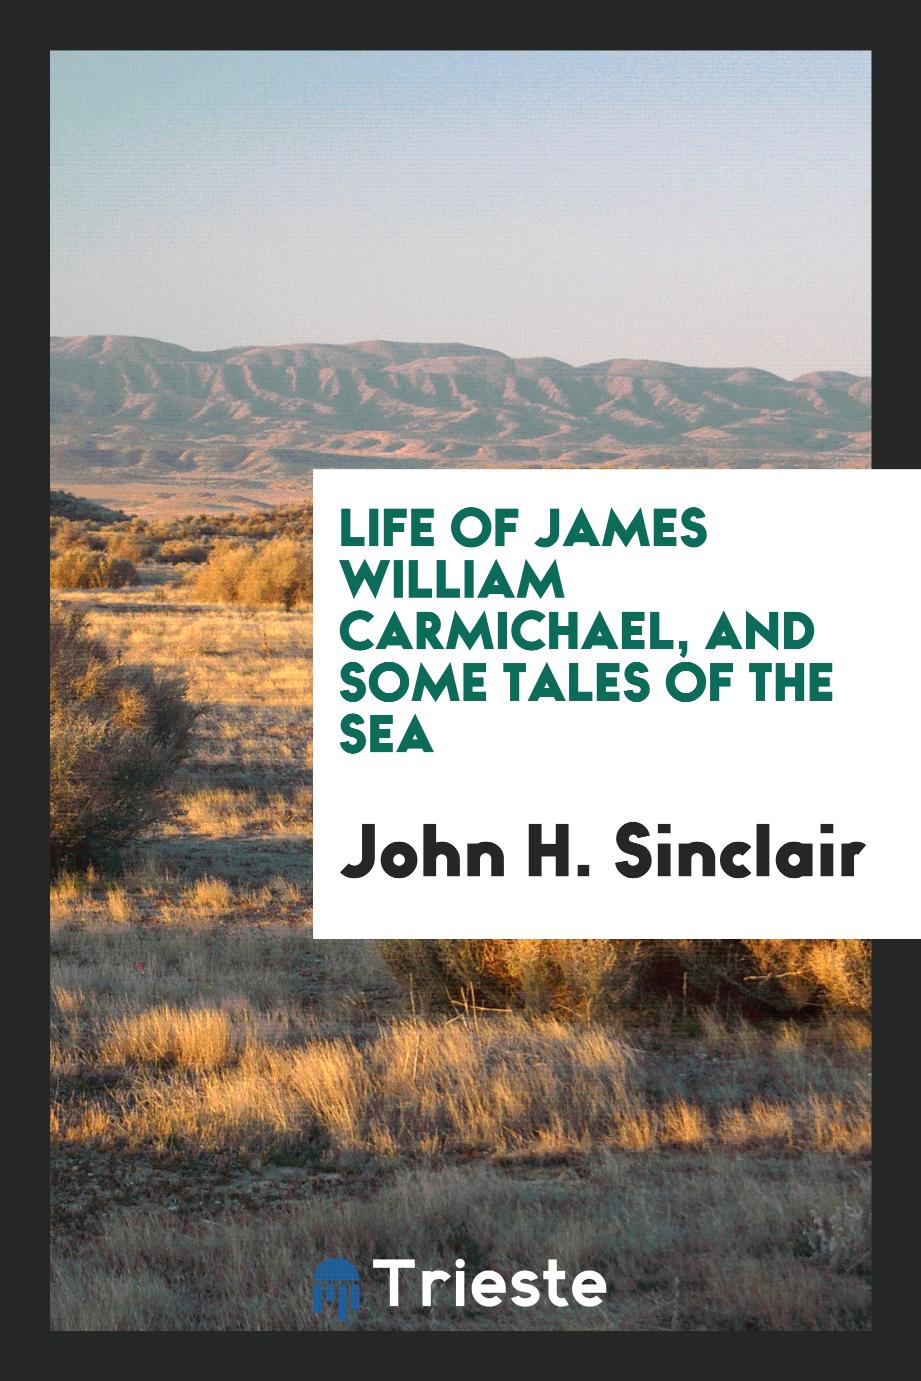 Life of James William Carmichael, and Some tales of the sea